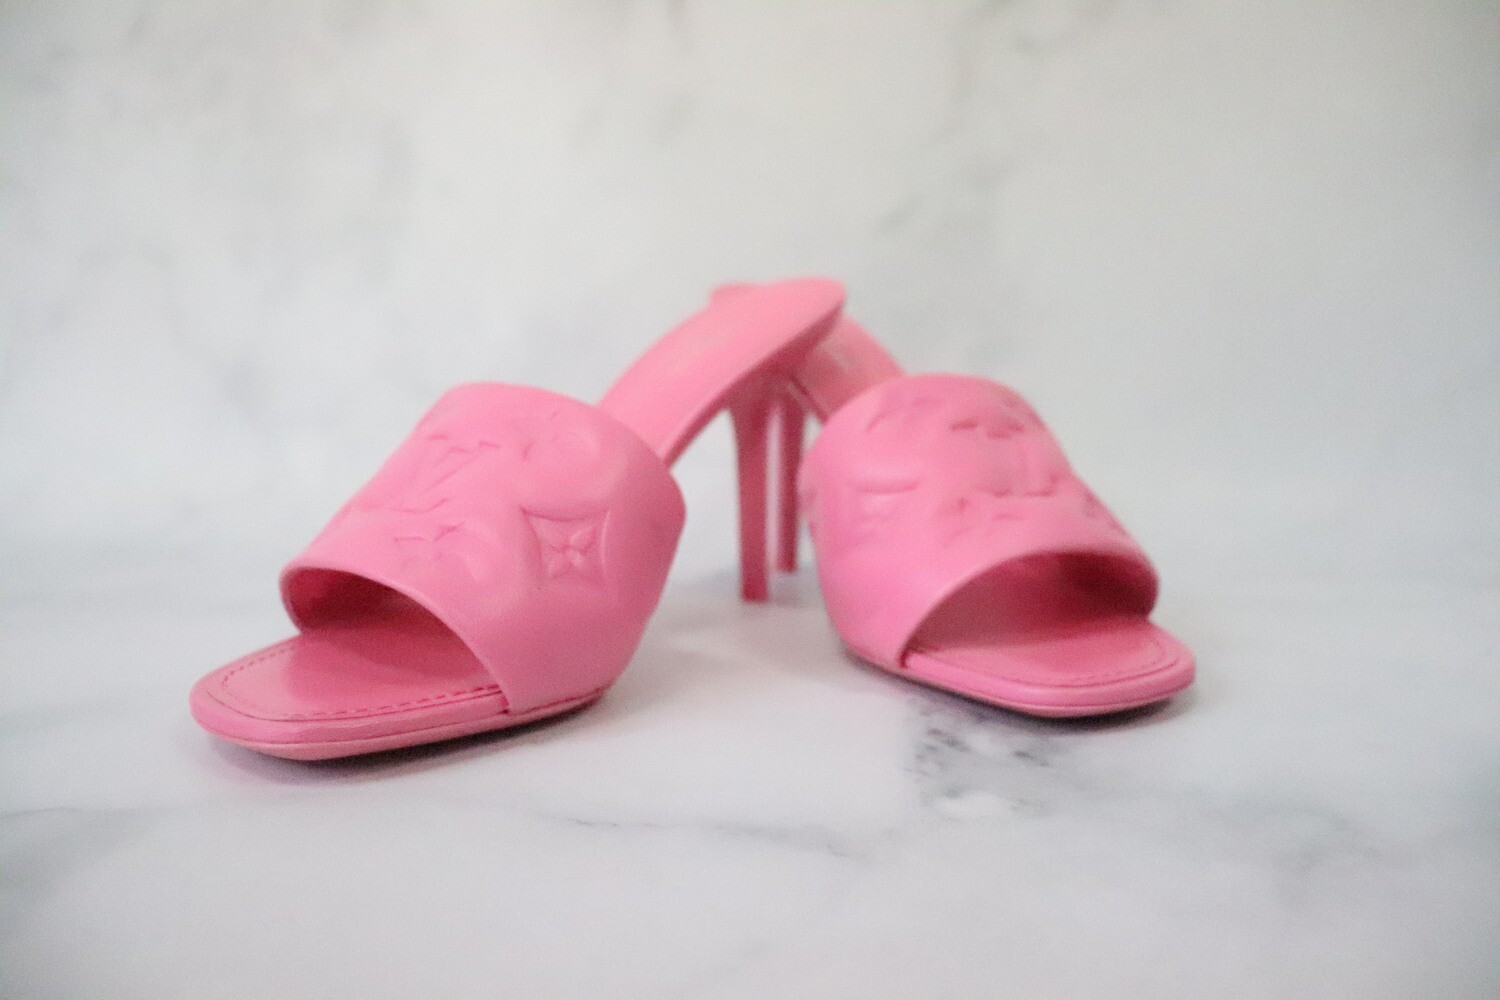 Louis Vuitton Revival Mules Heels, Pink, New in Box